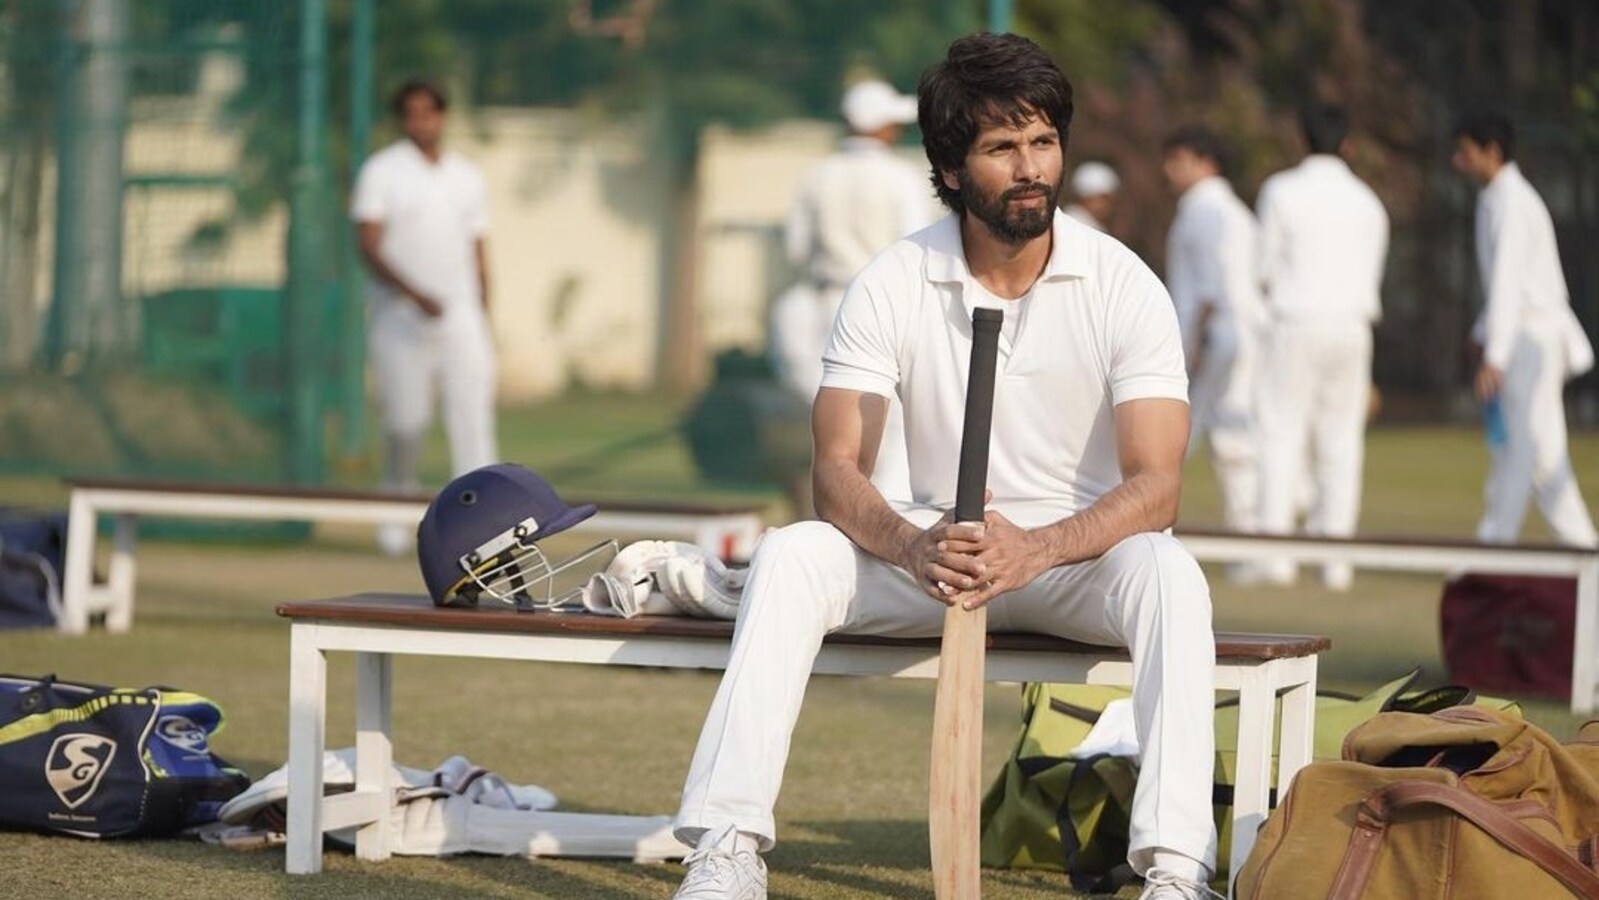 Shahid Kapoor says he calls Jersey producers daily to confirm release date after two delays: ‘Ye time final hai na?’